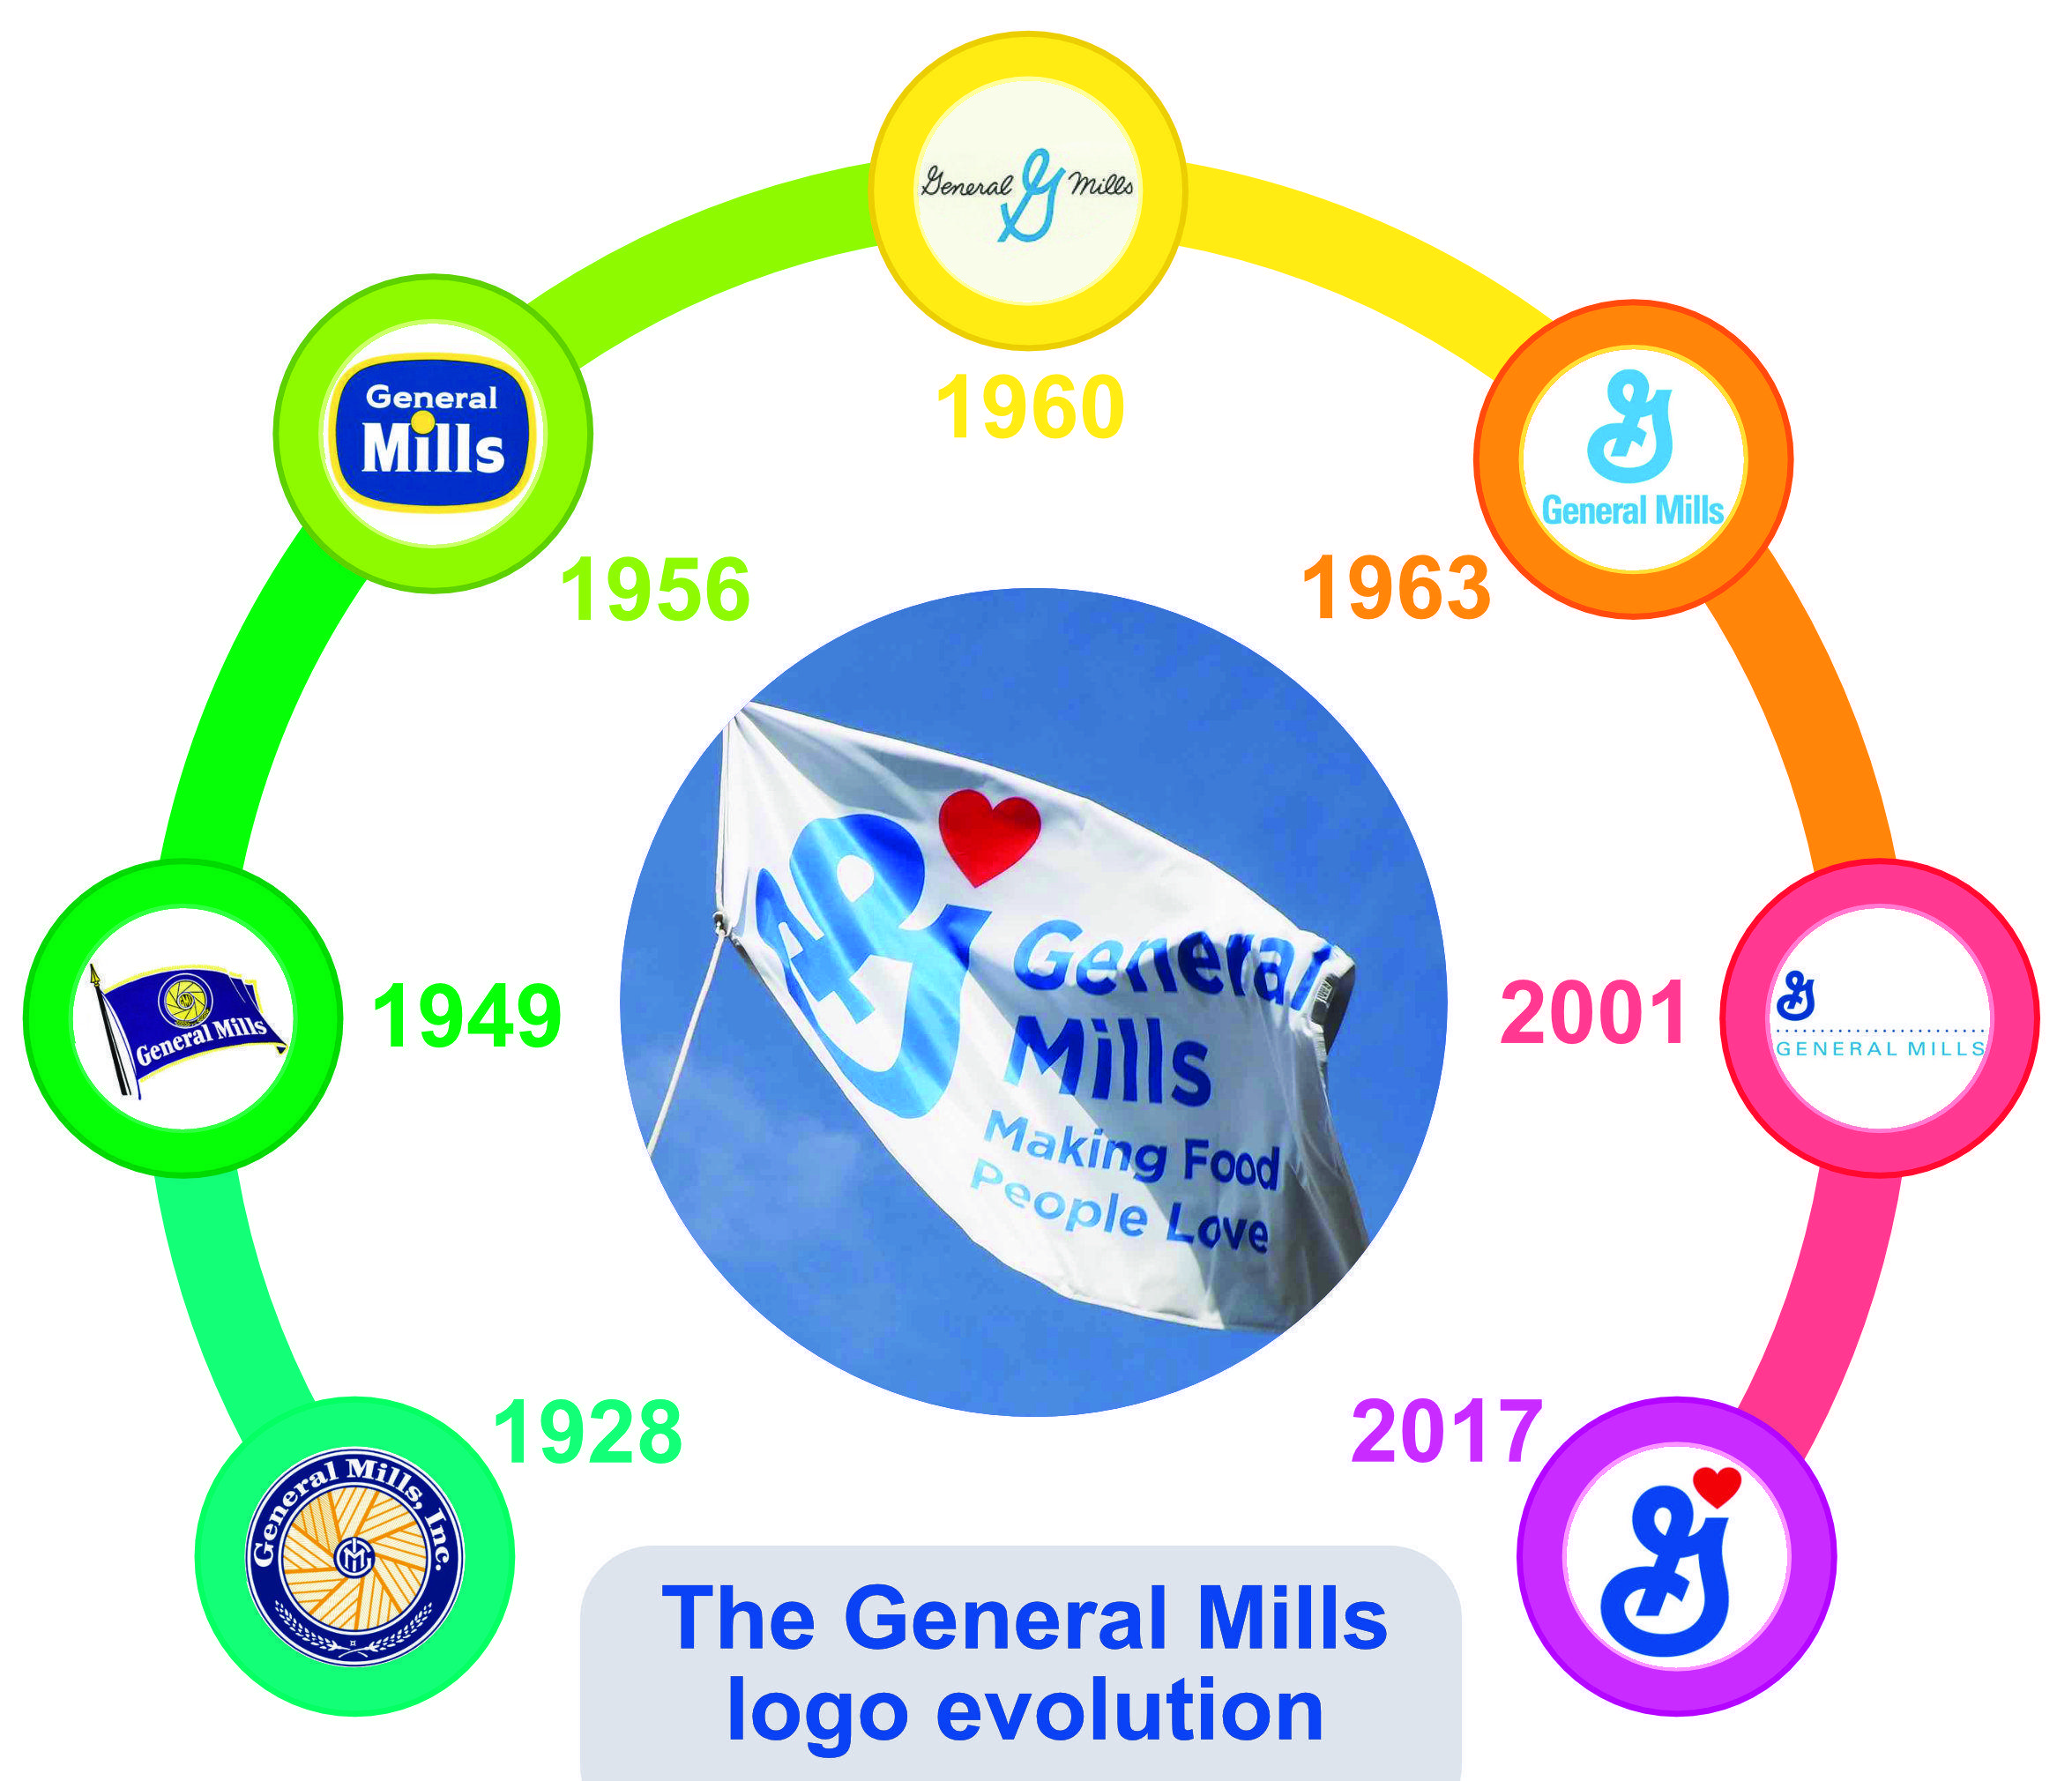 General Mills Logo - General Mills adds a little love to logo | Food Business News ...